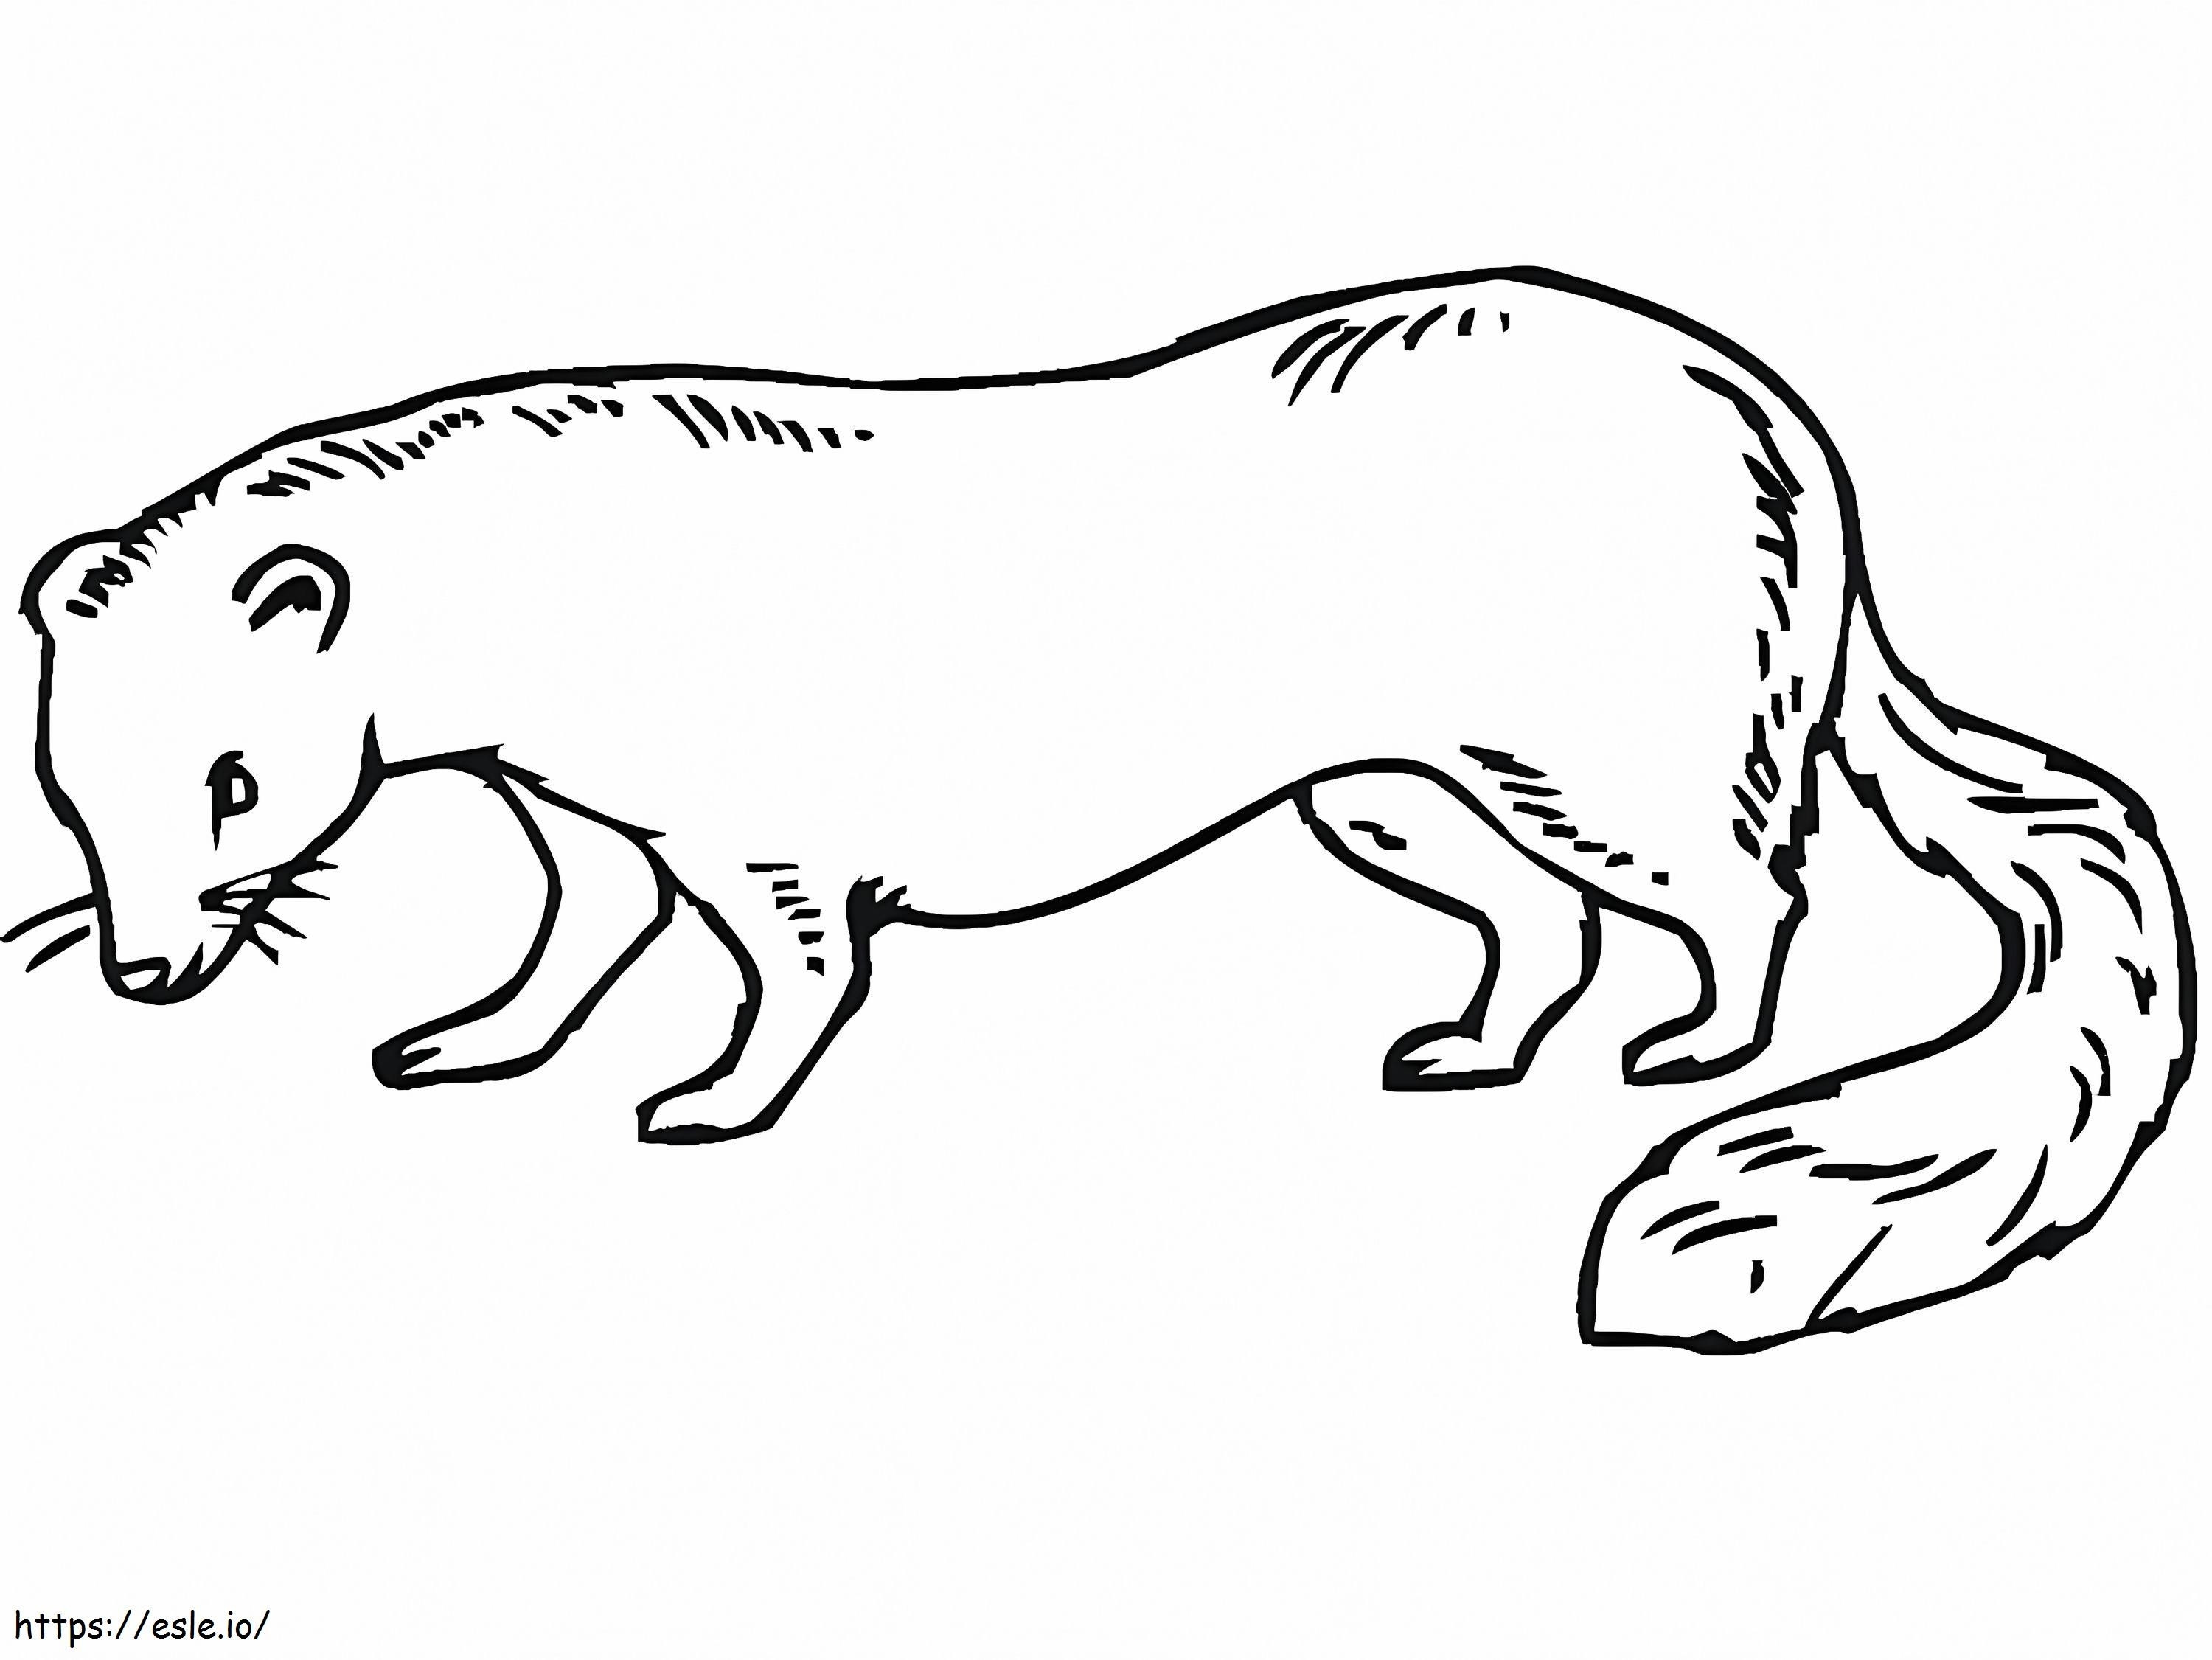 Free Printable Weasel coloring page